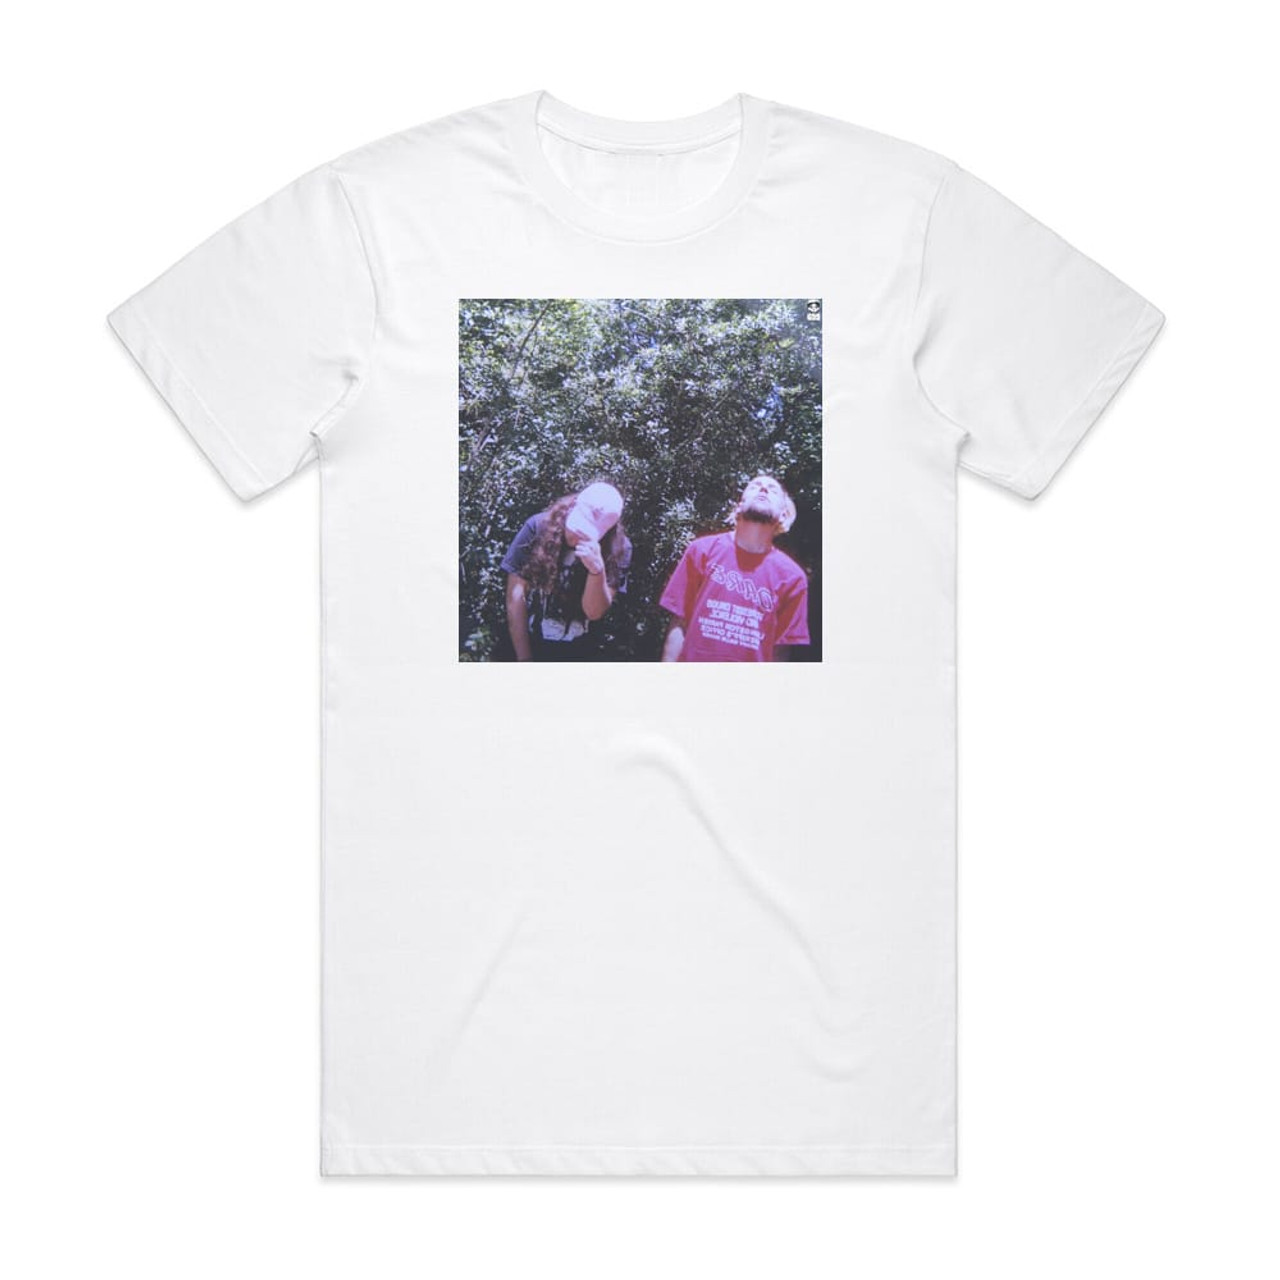 SuicideboyS High Tide In The Snakes Nest Album Cover T-Shirt White